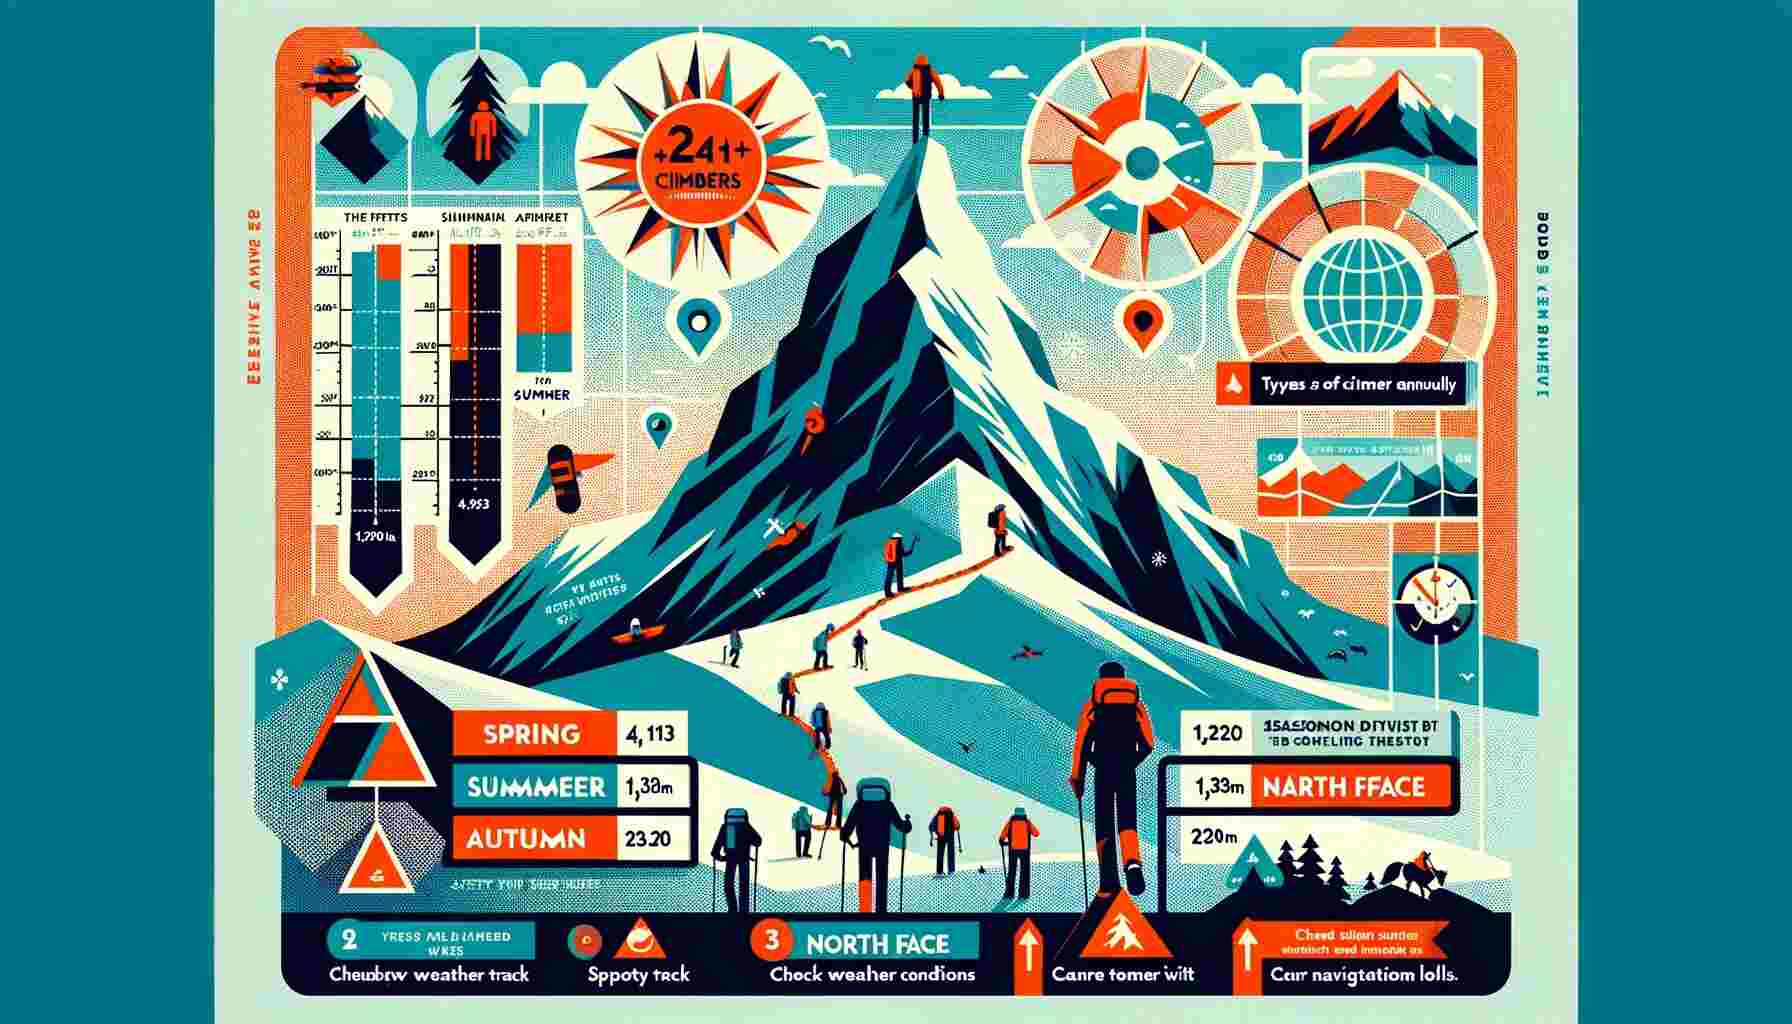 An infographic detailing the popularity and statistics of climbing Ben Nevis, featuring a stylized representation of the mountain at its height of 4,413 feet. The infographic includes a bar chart indicating that over 130,000 hikers climb annually, with icons illustrating the seasonal distribution of climbers and the different routes available, such as the Pony Track, CMD Arete, and North Face, categorized by difficulty. Safety tips are visually summarized with symbols for weather checks and navigational tools. The design employs vibrant colors, clear typography, and engaging visuals to educate viewers on climbing Ben Nevis.